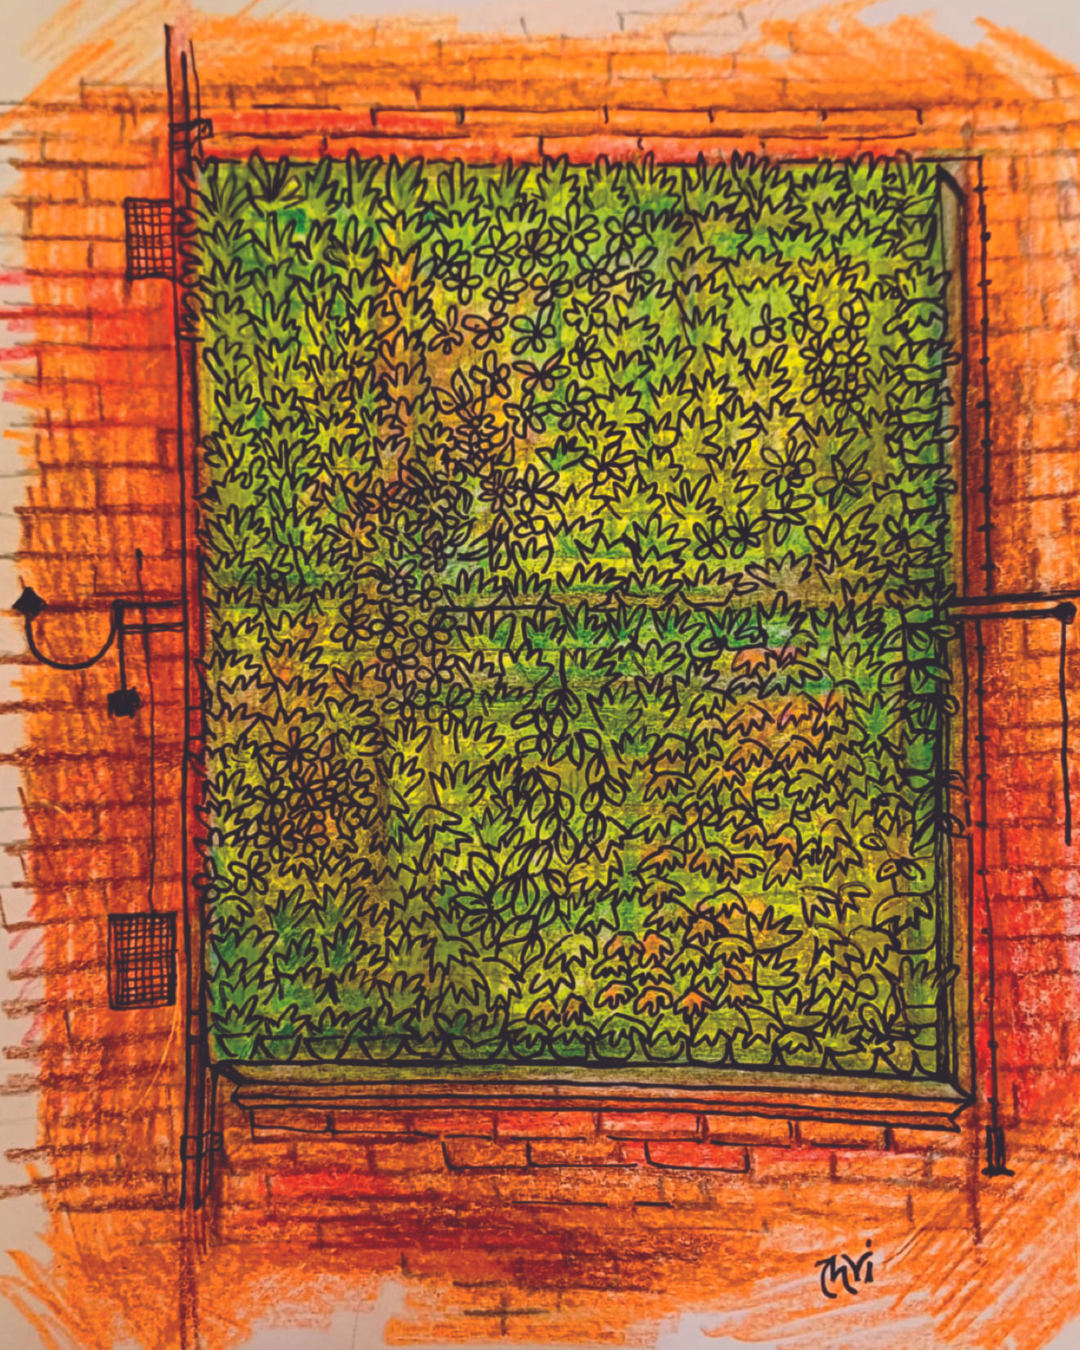 A drawing of a brick wall with a green 'living wall' on top of it - a rectangle of plants arranged vertically